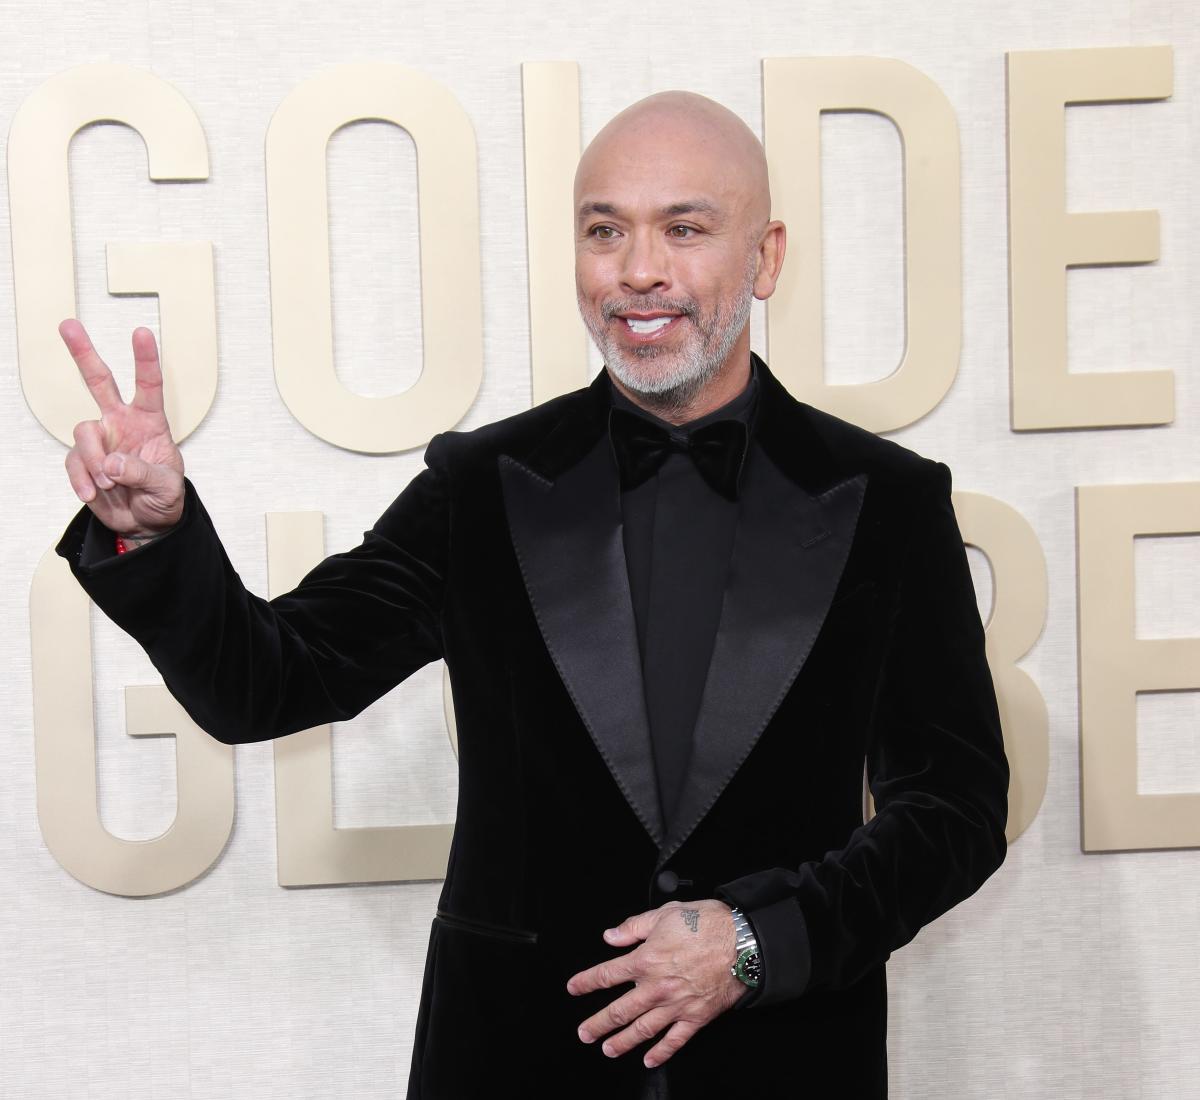 Jo Koy's Golden Globes opening monologue met with blank stares 'I got